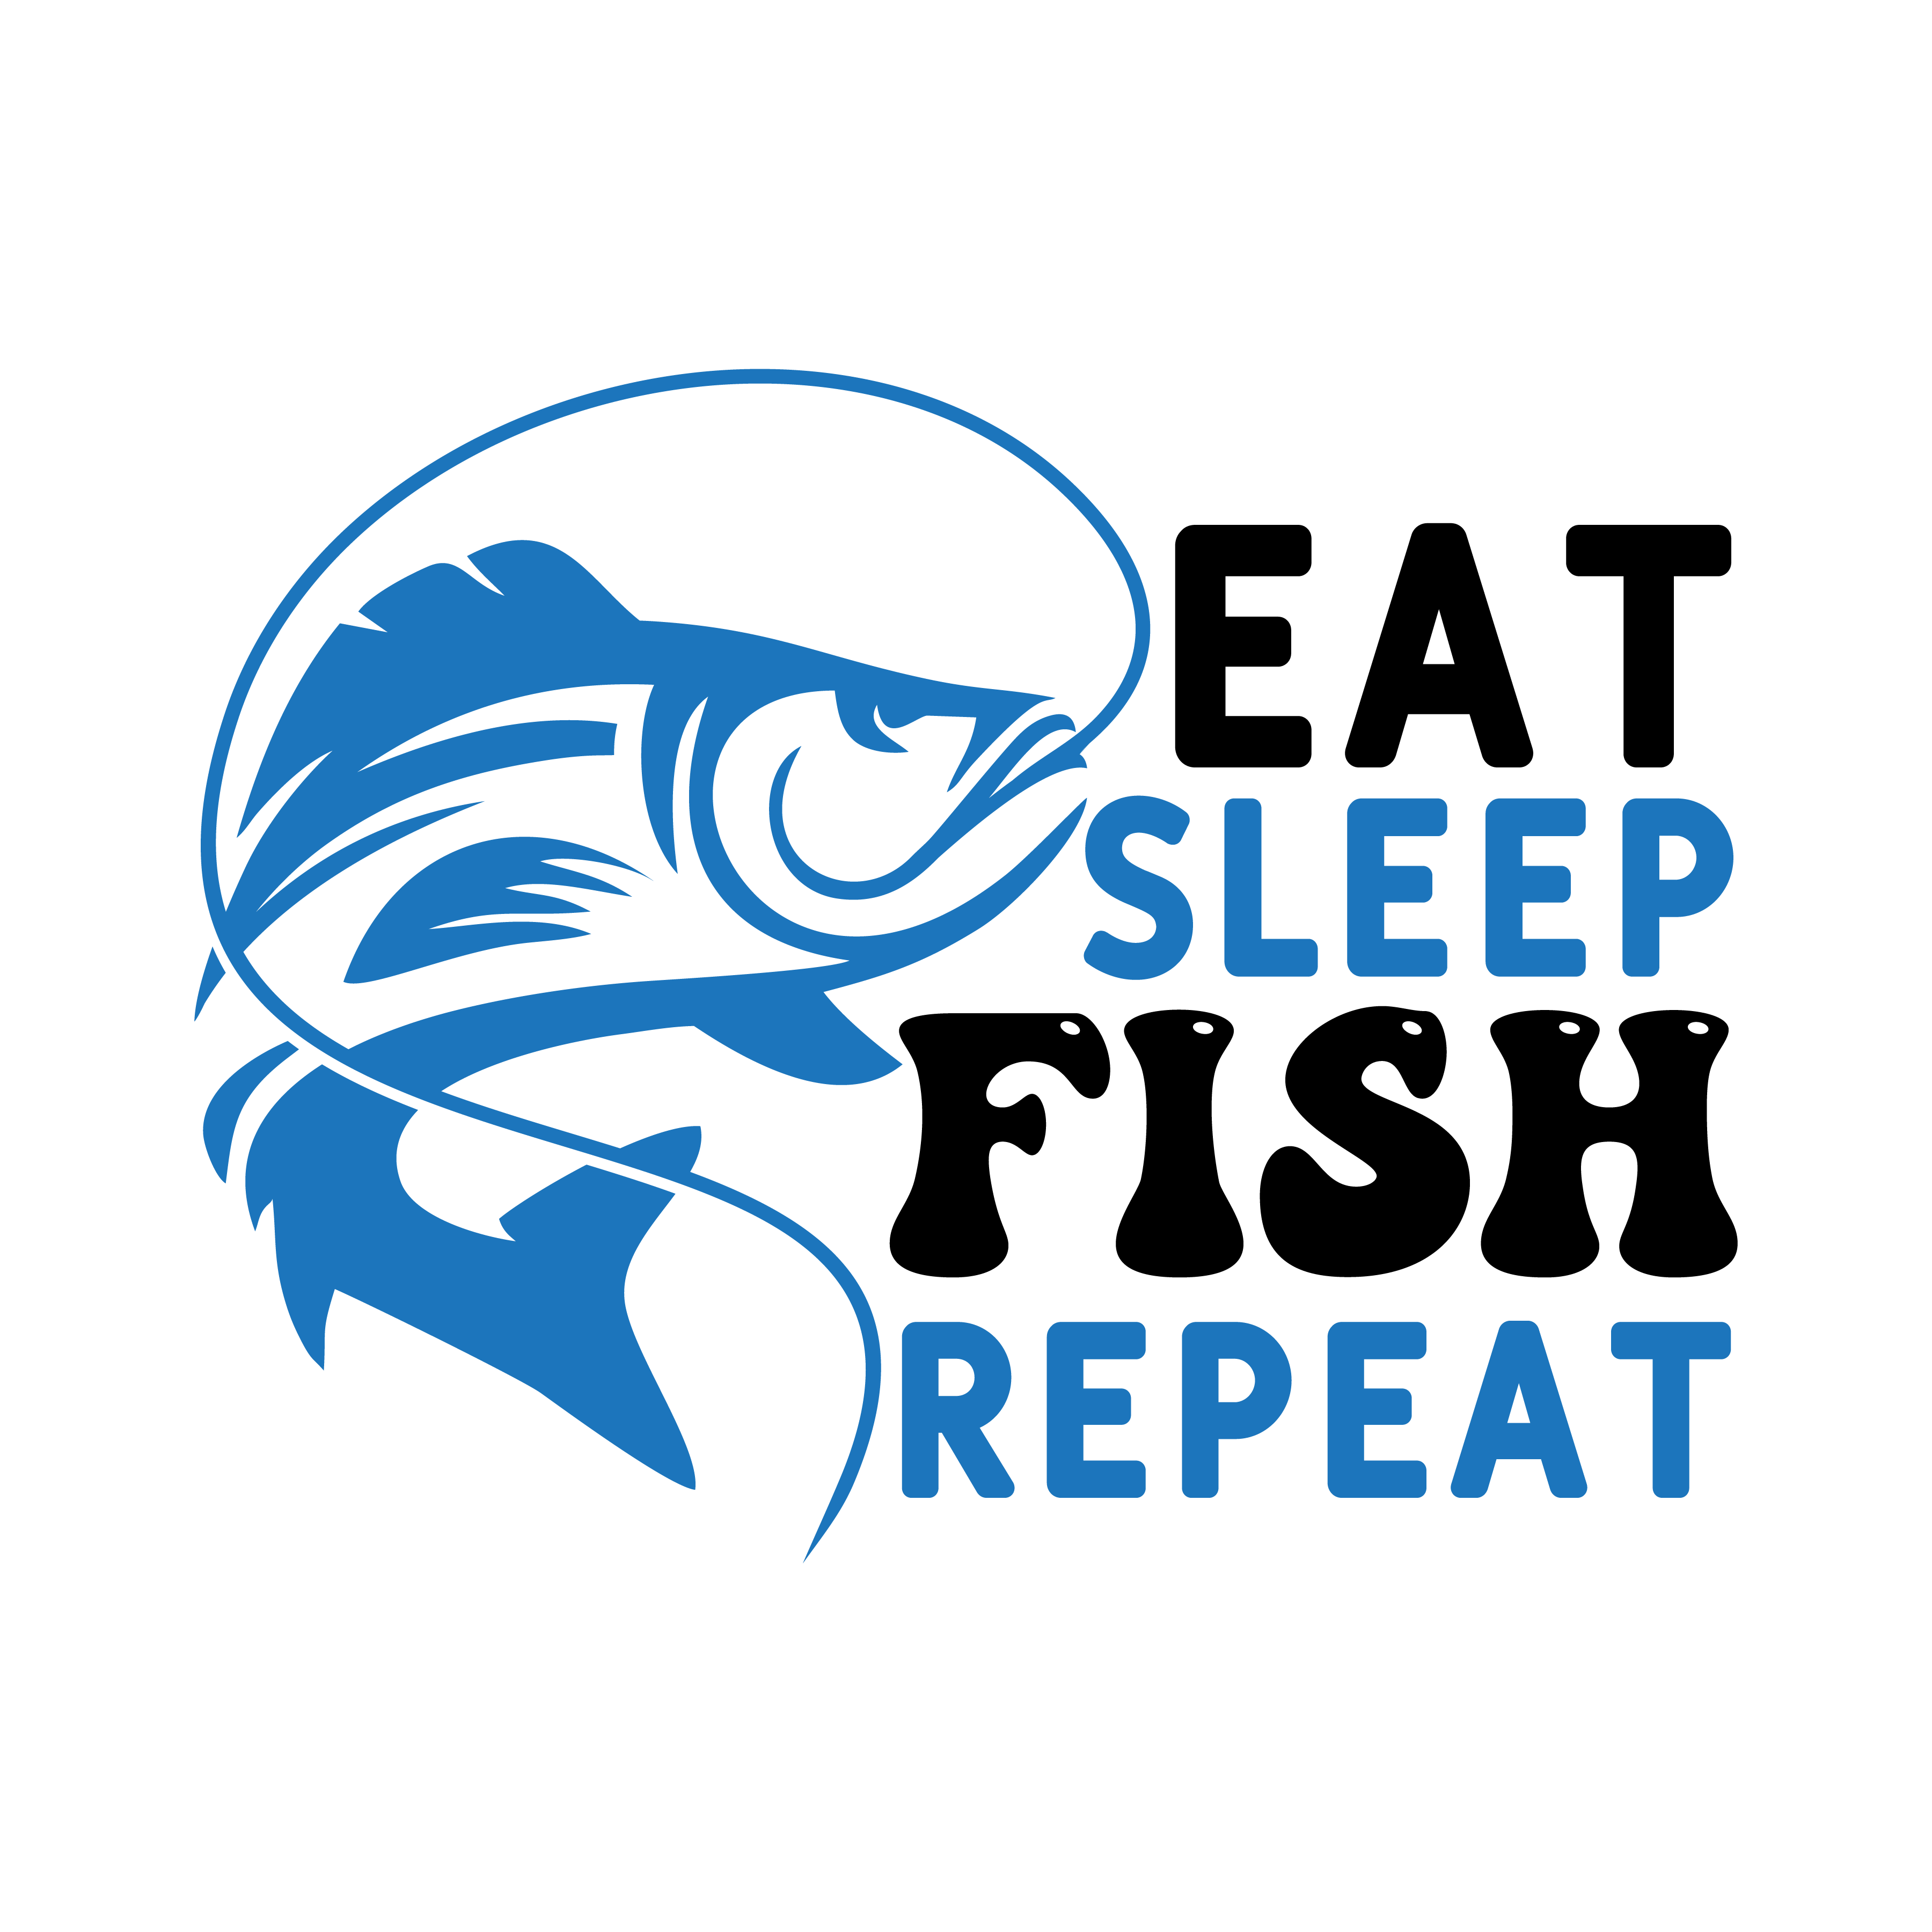 eat sleep fish repeat, Fishing quotes, fishing sayings, Cricut designs, free, clip art, svg file, template, pattern, stencil, silhouette, cut file, design space, short, funny, shirt, cup, DIY crafts and projects, embroidery